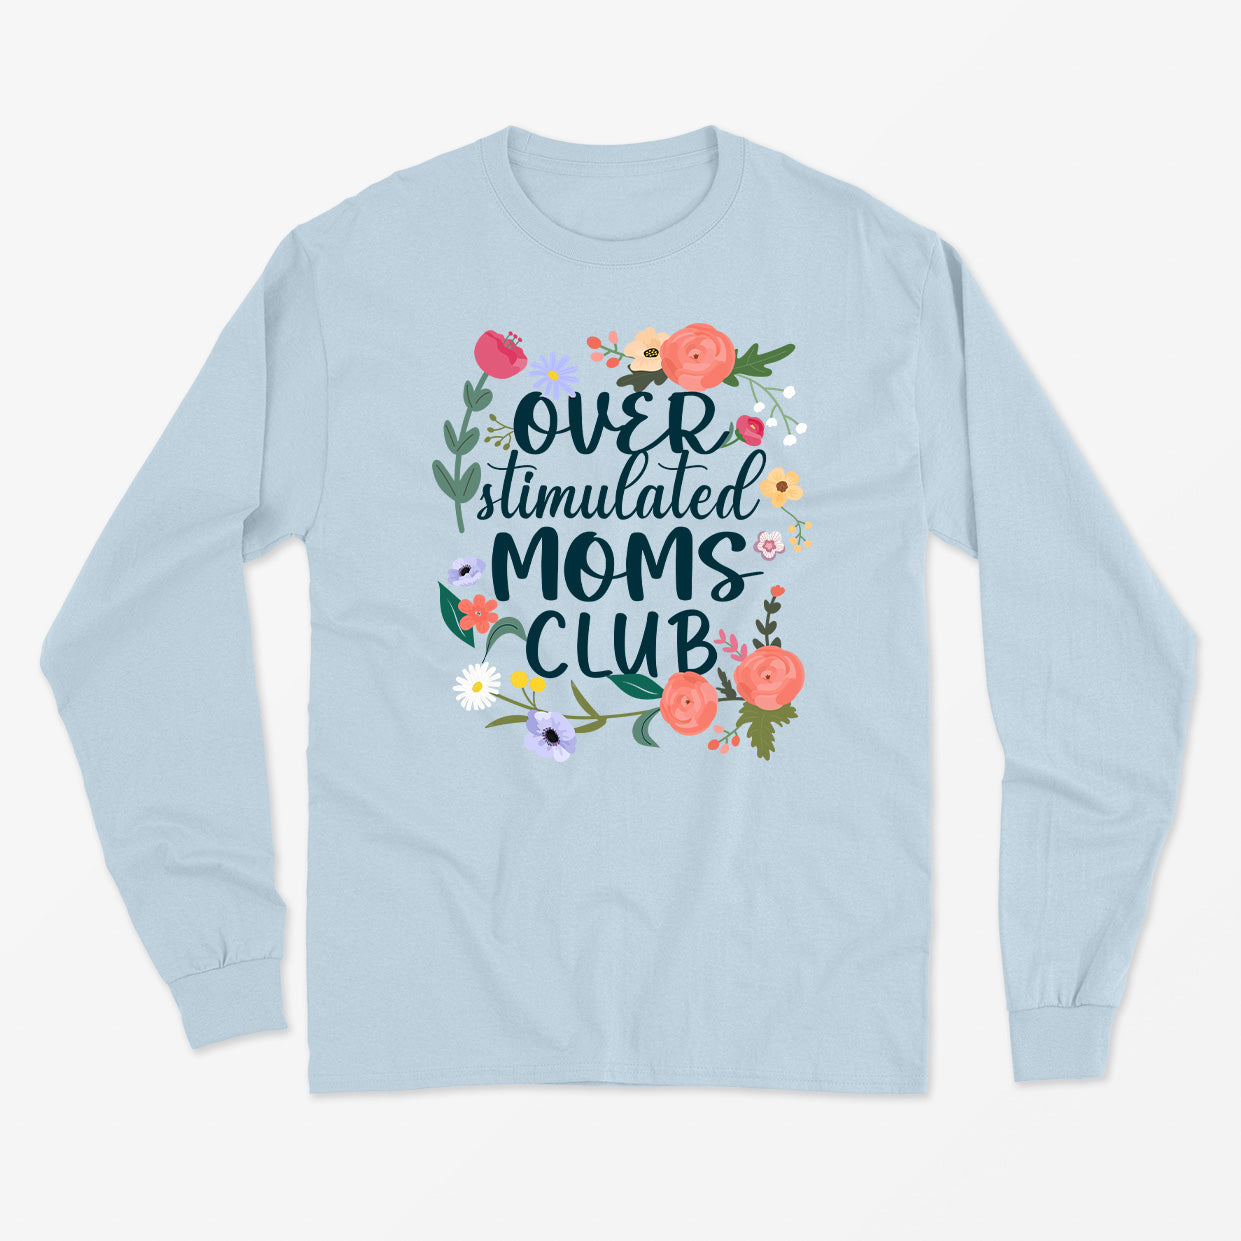 OVERSTIMULATED MOMS CLUB longsleeve unisexe - tamelo boutique